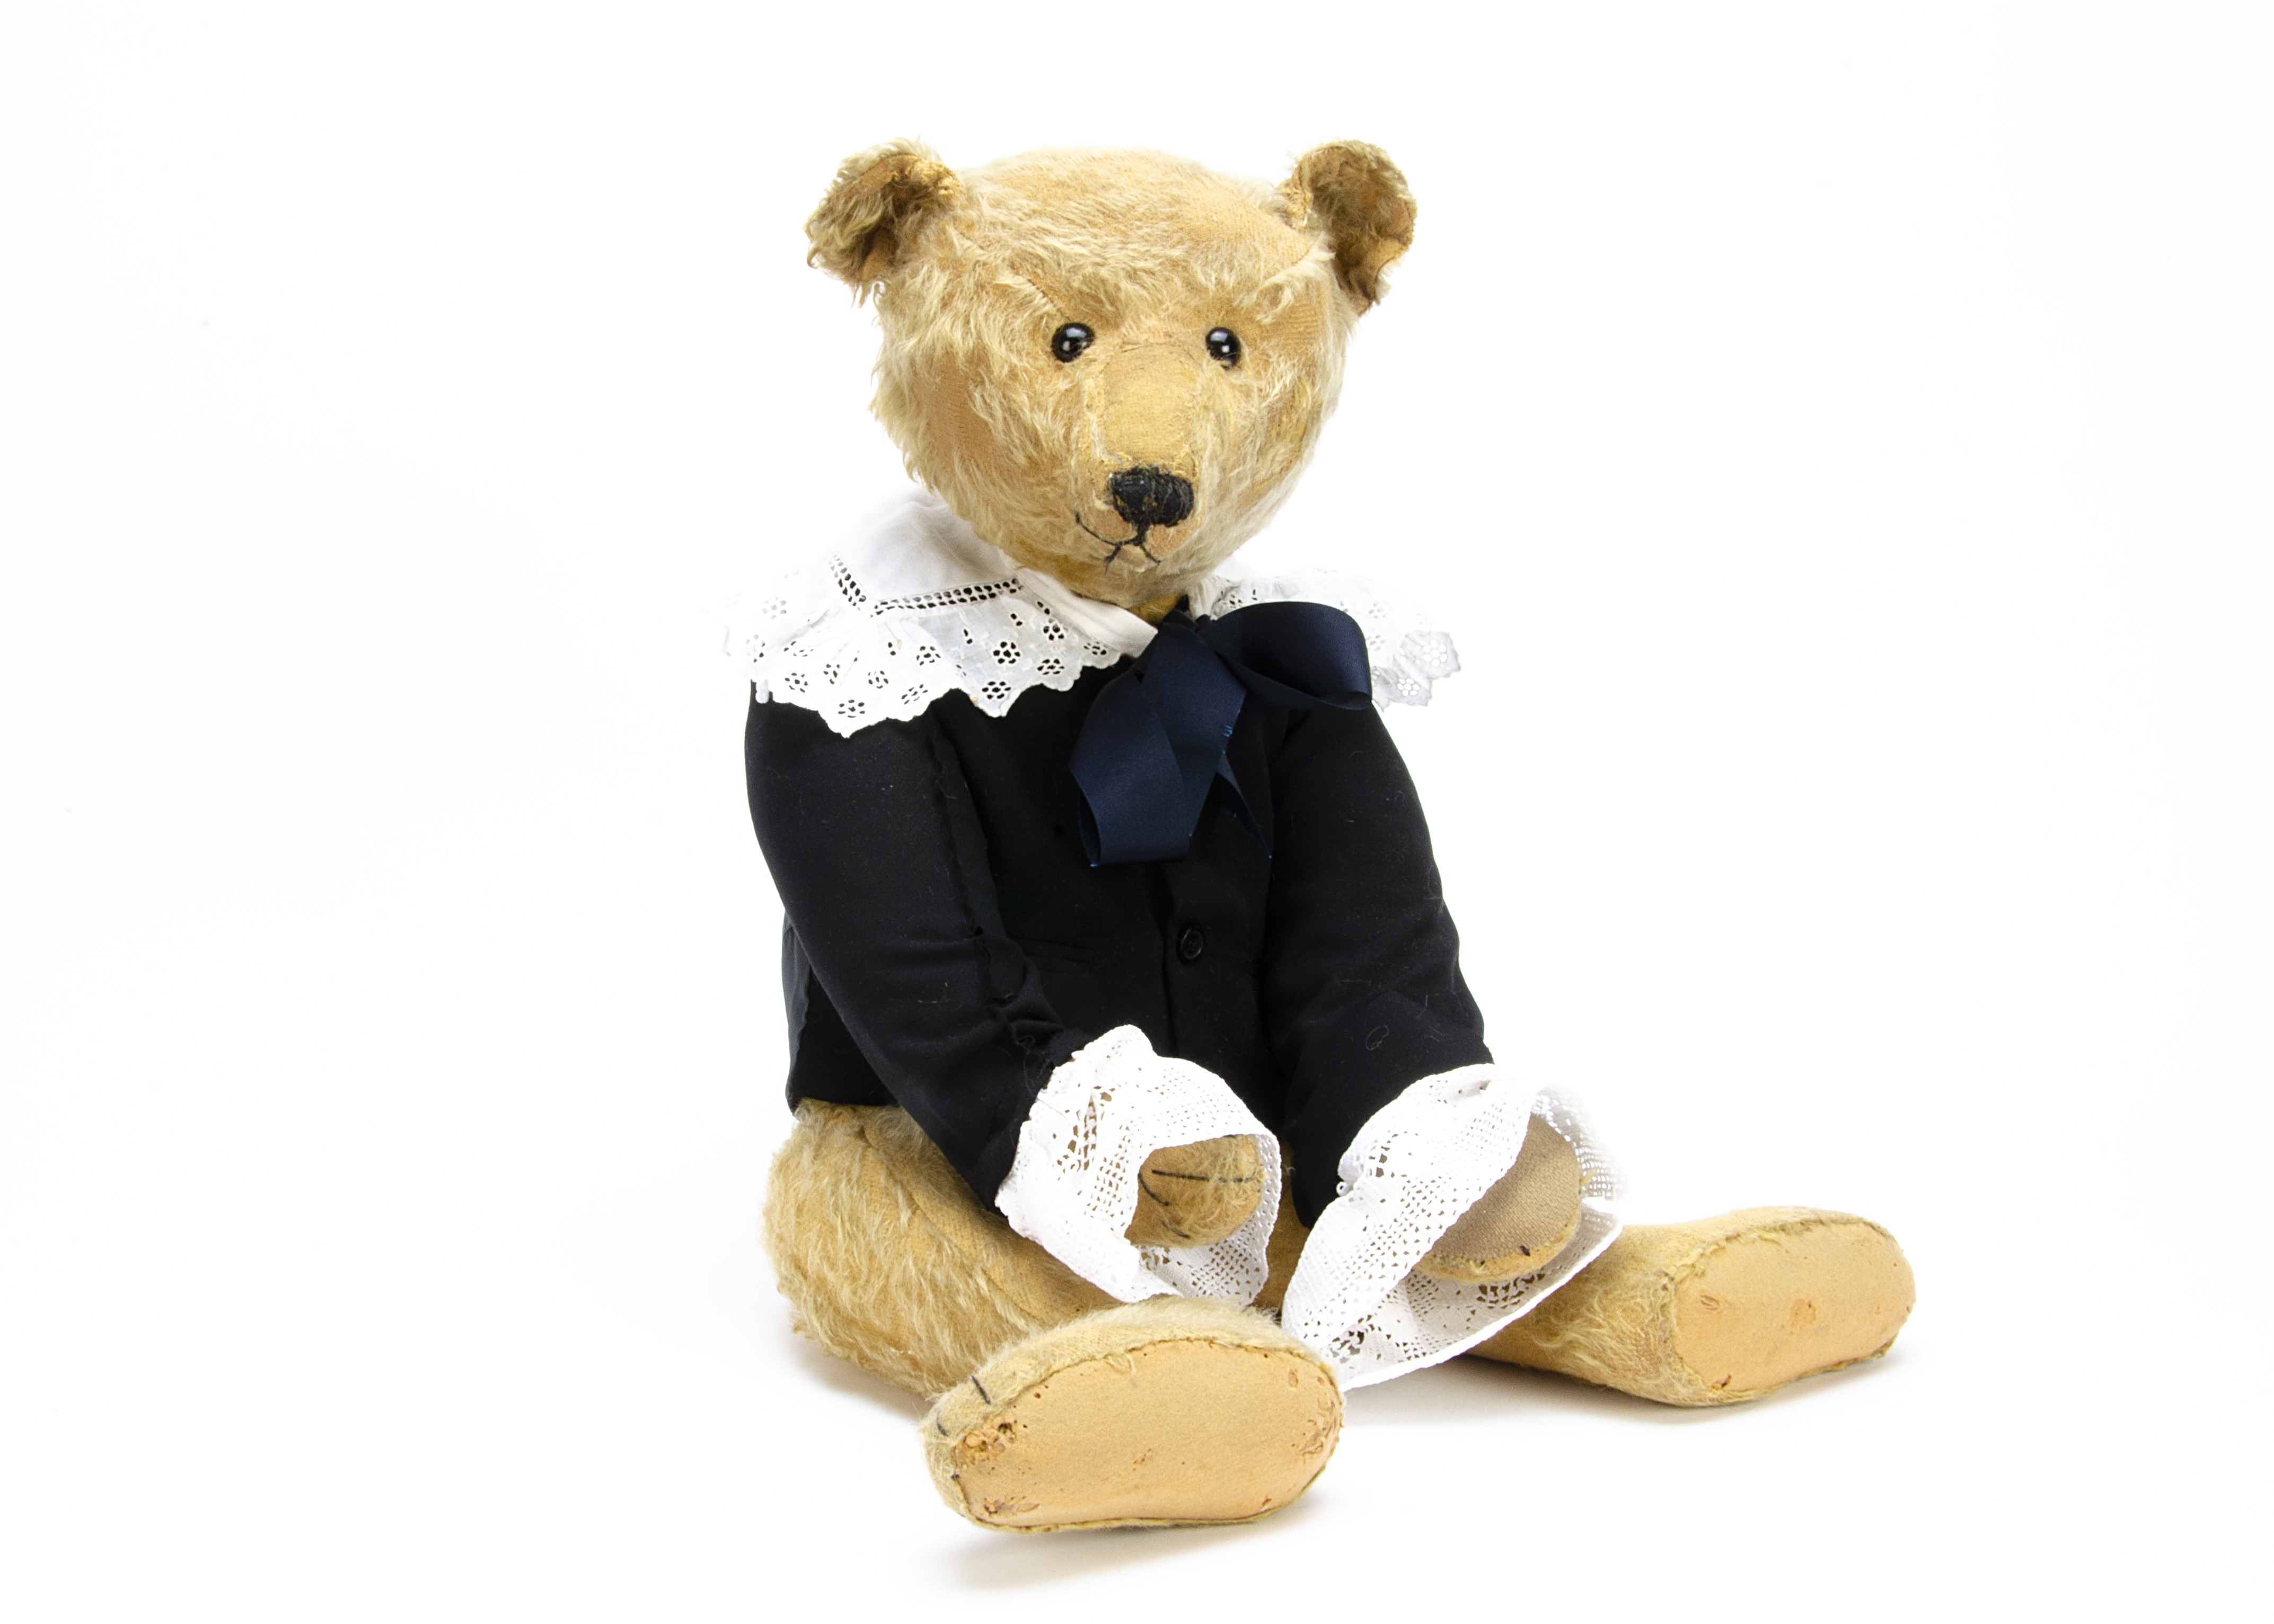 ’Jeremiah’ a large early Steiff teddy bear circa 1910, with golden mohair, black boot button eyes, - Image 3 of 4